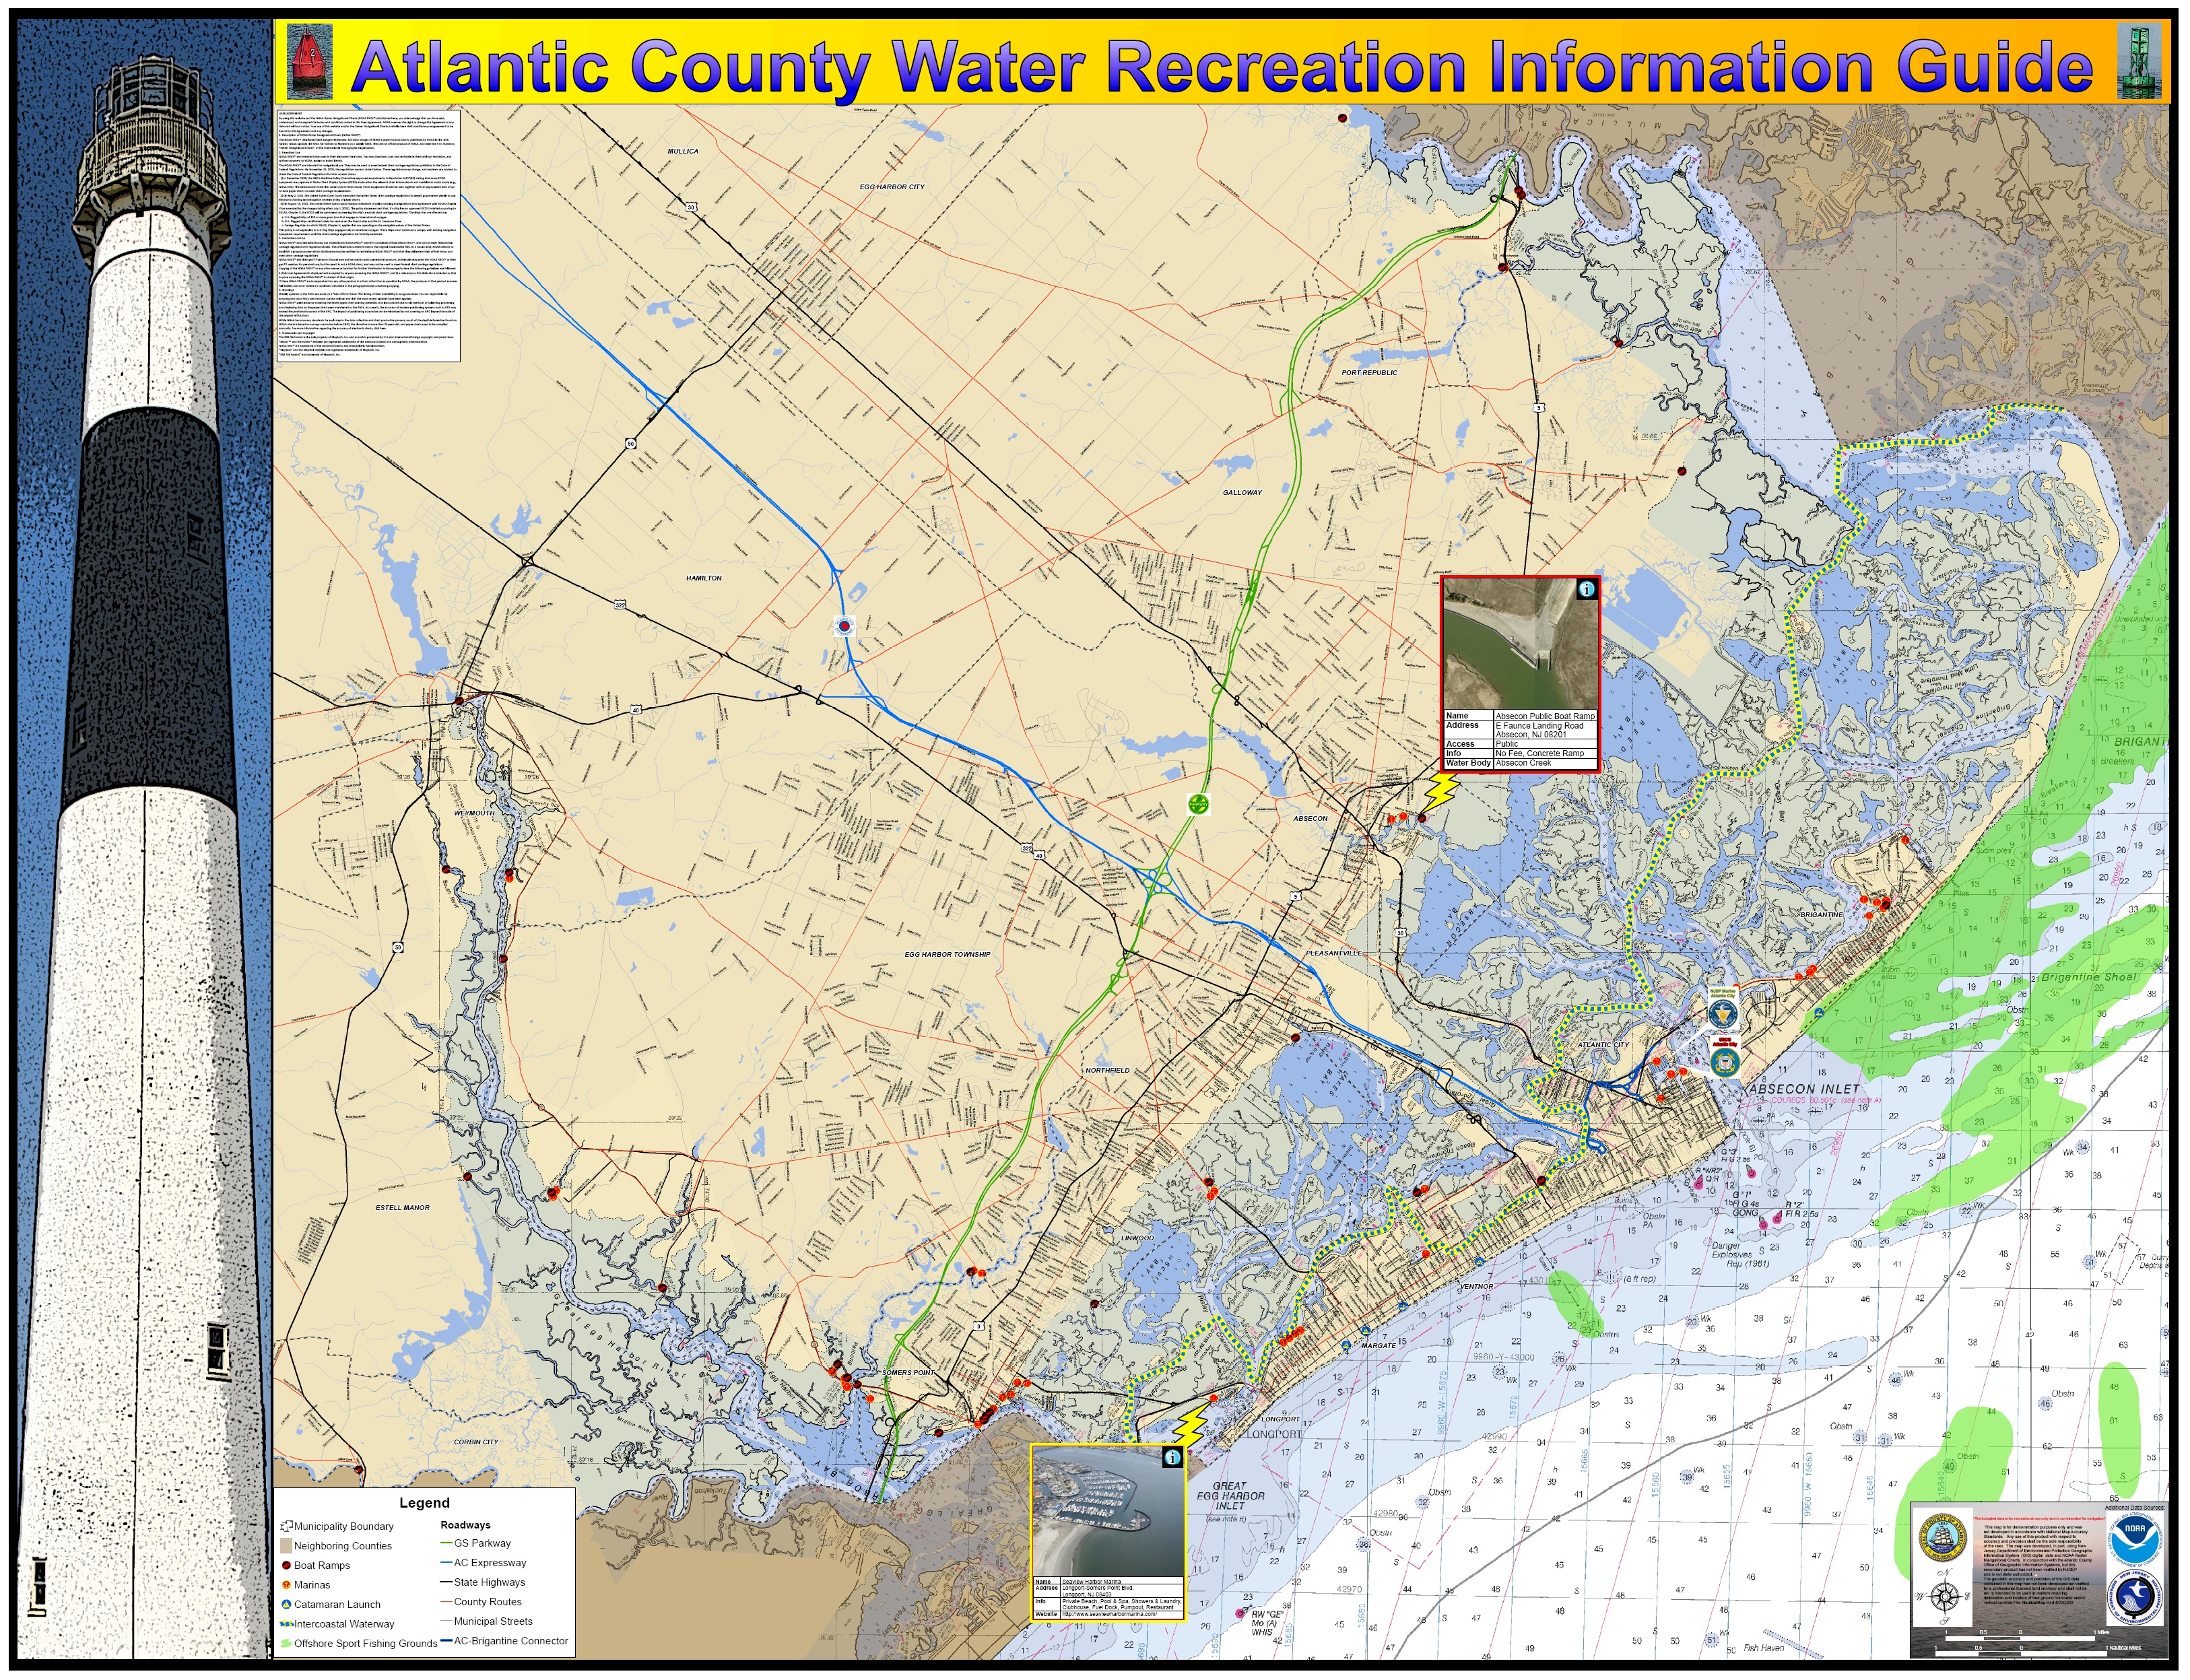 Atlantic County Water Recreation Information Guide